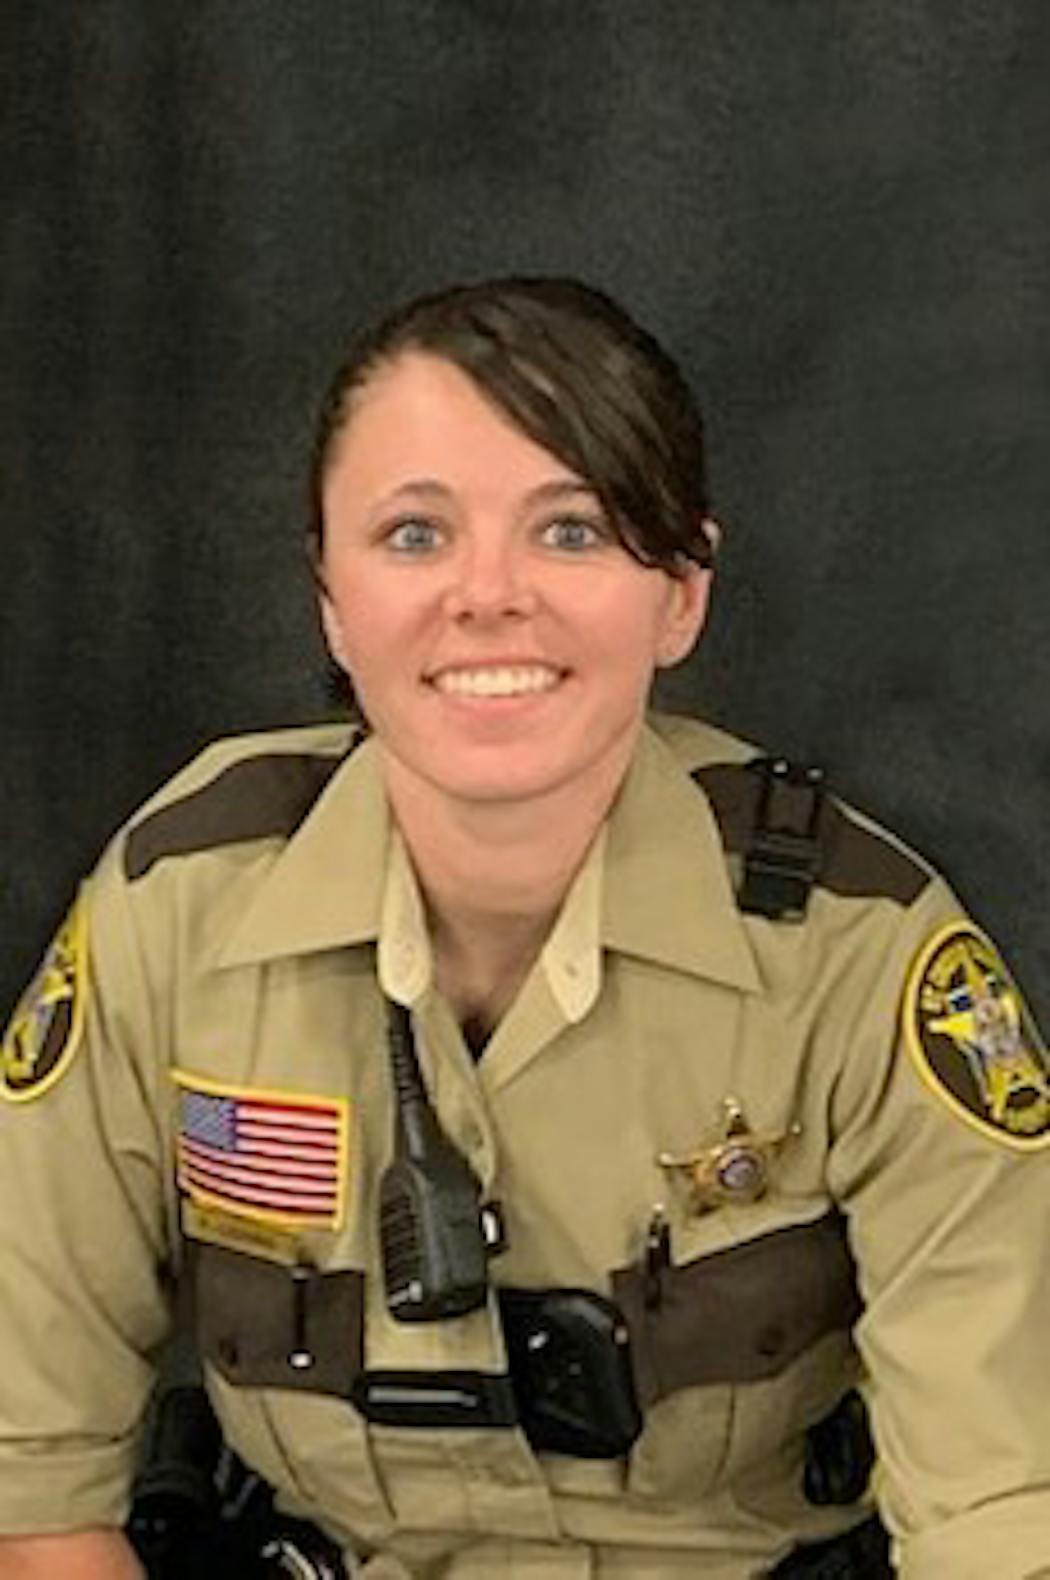 St. Croix County Sheriff's Deputy Katie Leising was shot and killed in the line of duty Saturday night.